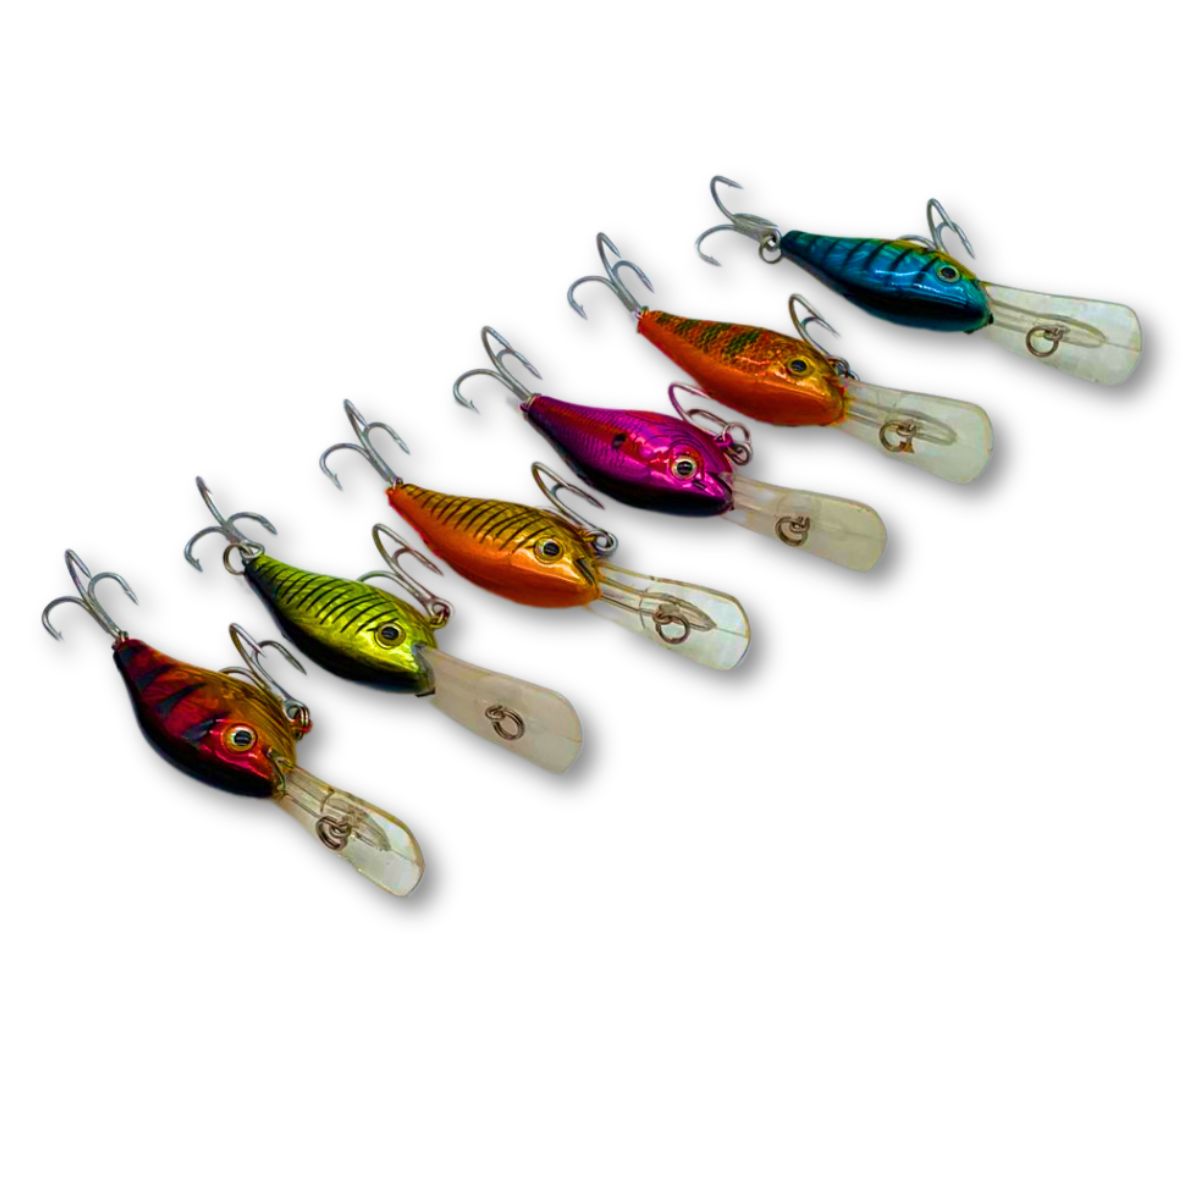 Clearance Fishing Lures & Bait